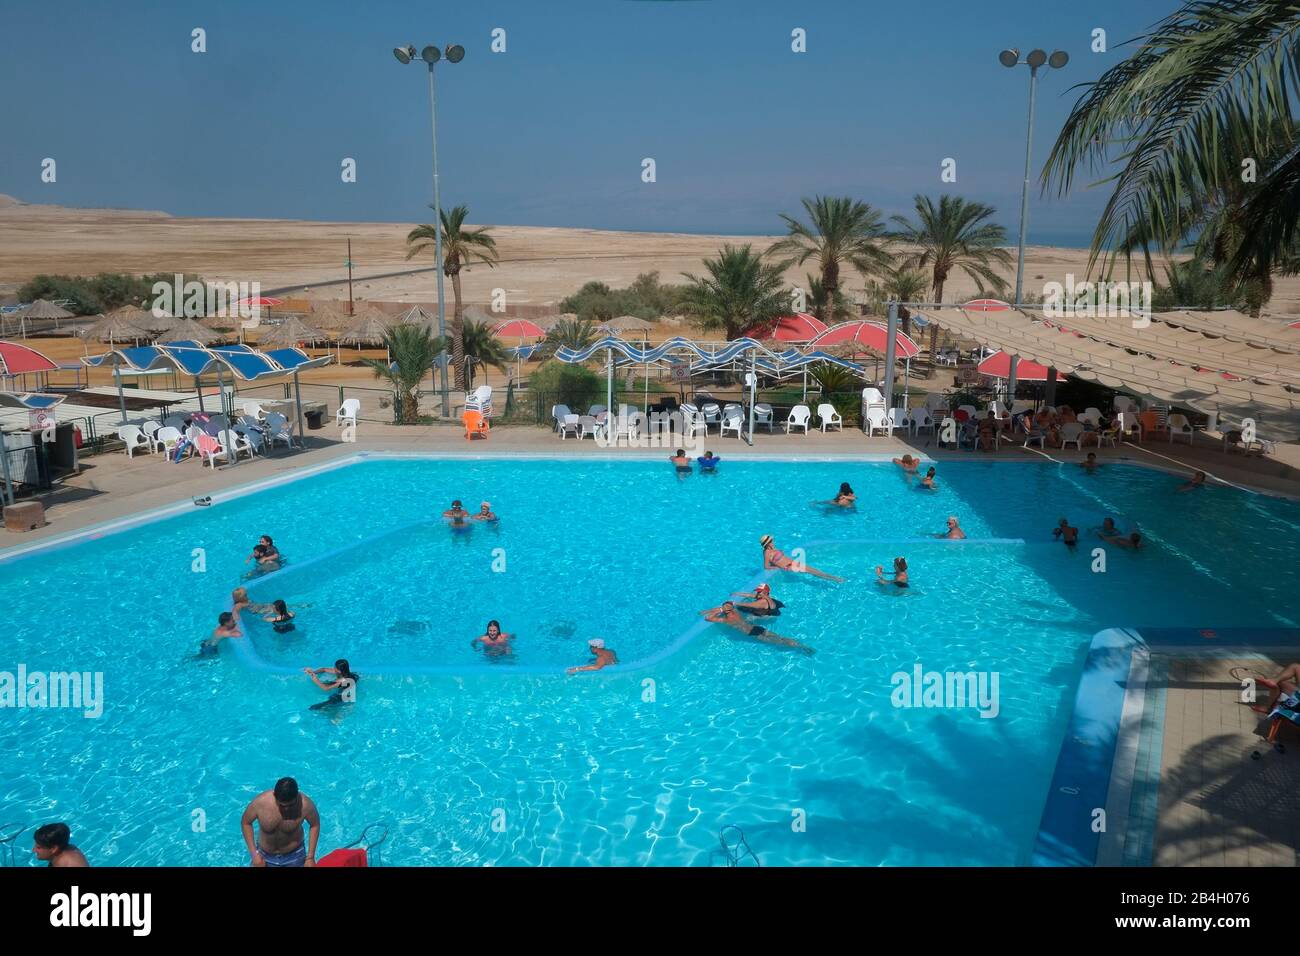 Swimming pool with Dead Sea in background in En Gedi oasis, Israel. Ein Gedi , literally 'spring of the kid (young goa' is an oasis and a nature reserve in Israel, located west of the Dead Sea, near Masada and the Qumran Caves. Ein Gedi was listed in 2016 as one of the most popular nature sites in the country Stock Photo